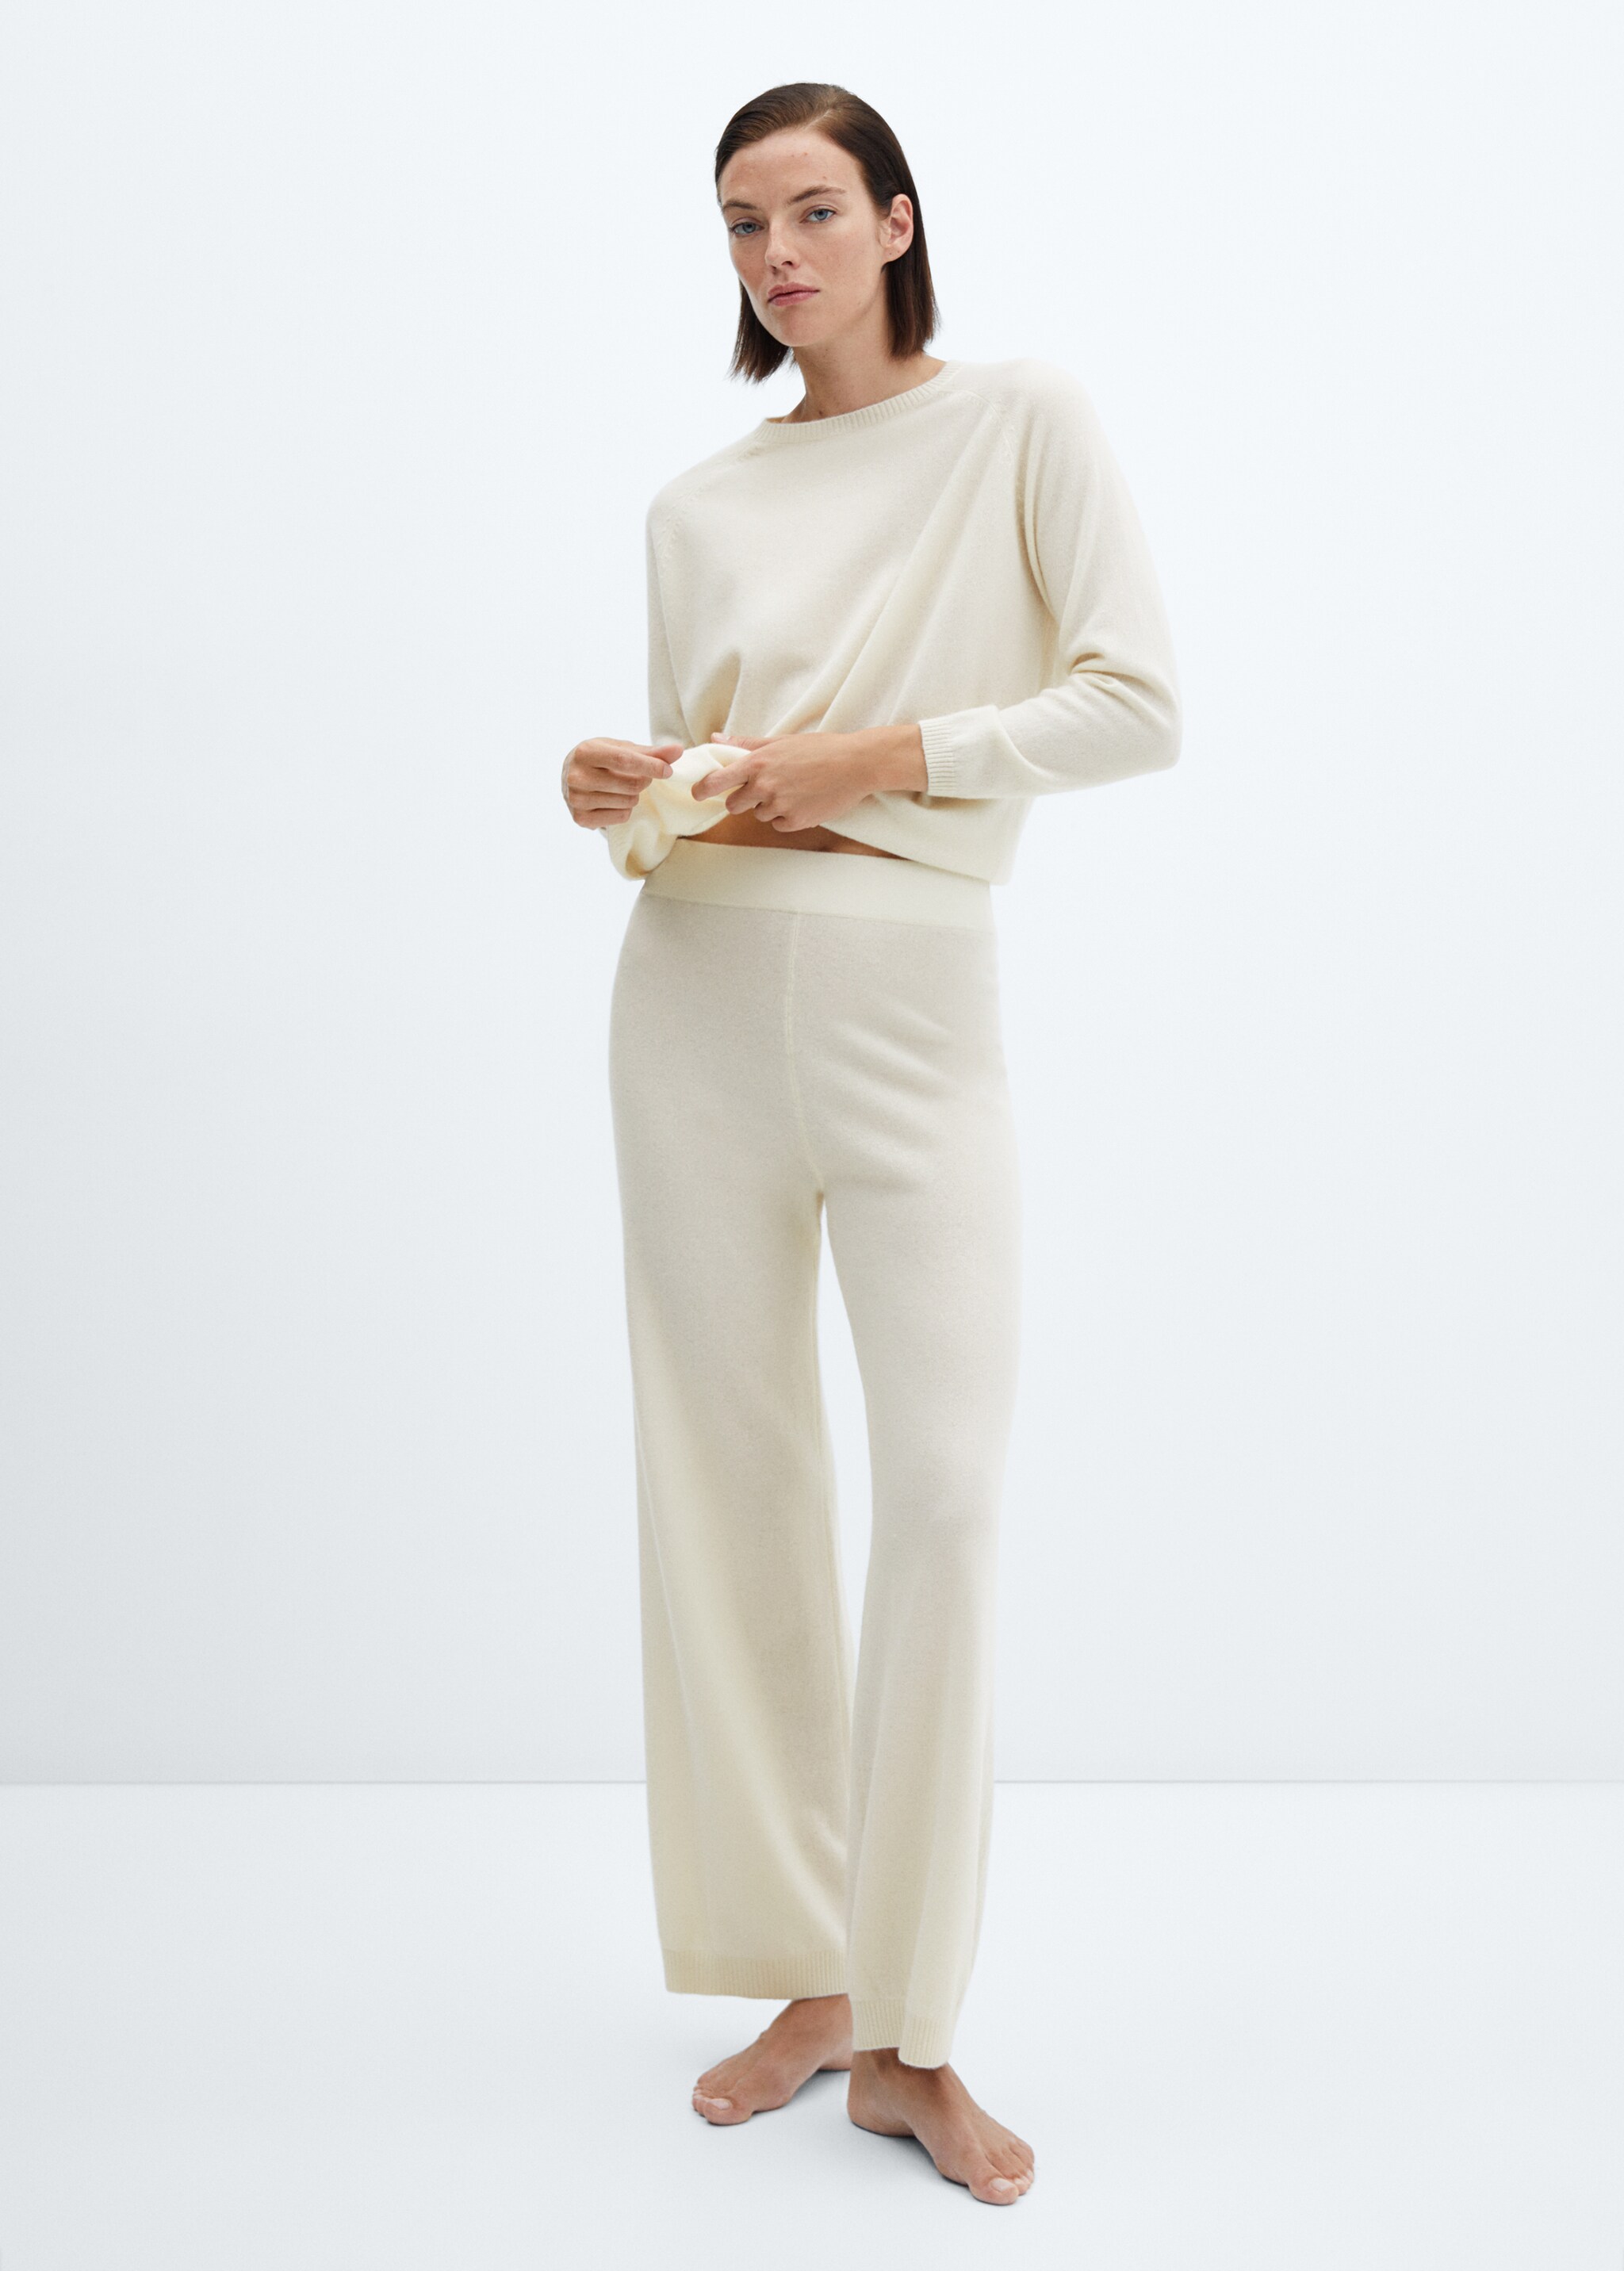 100% Cashmere trousers - General plane